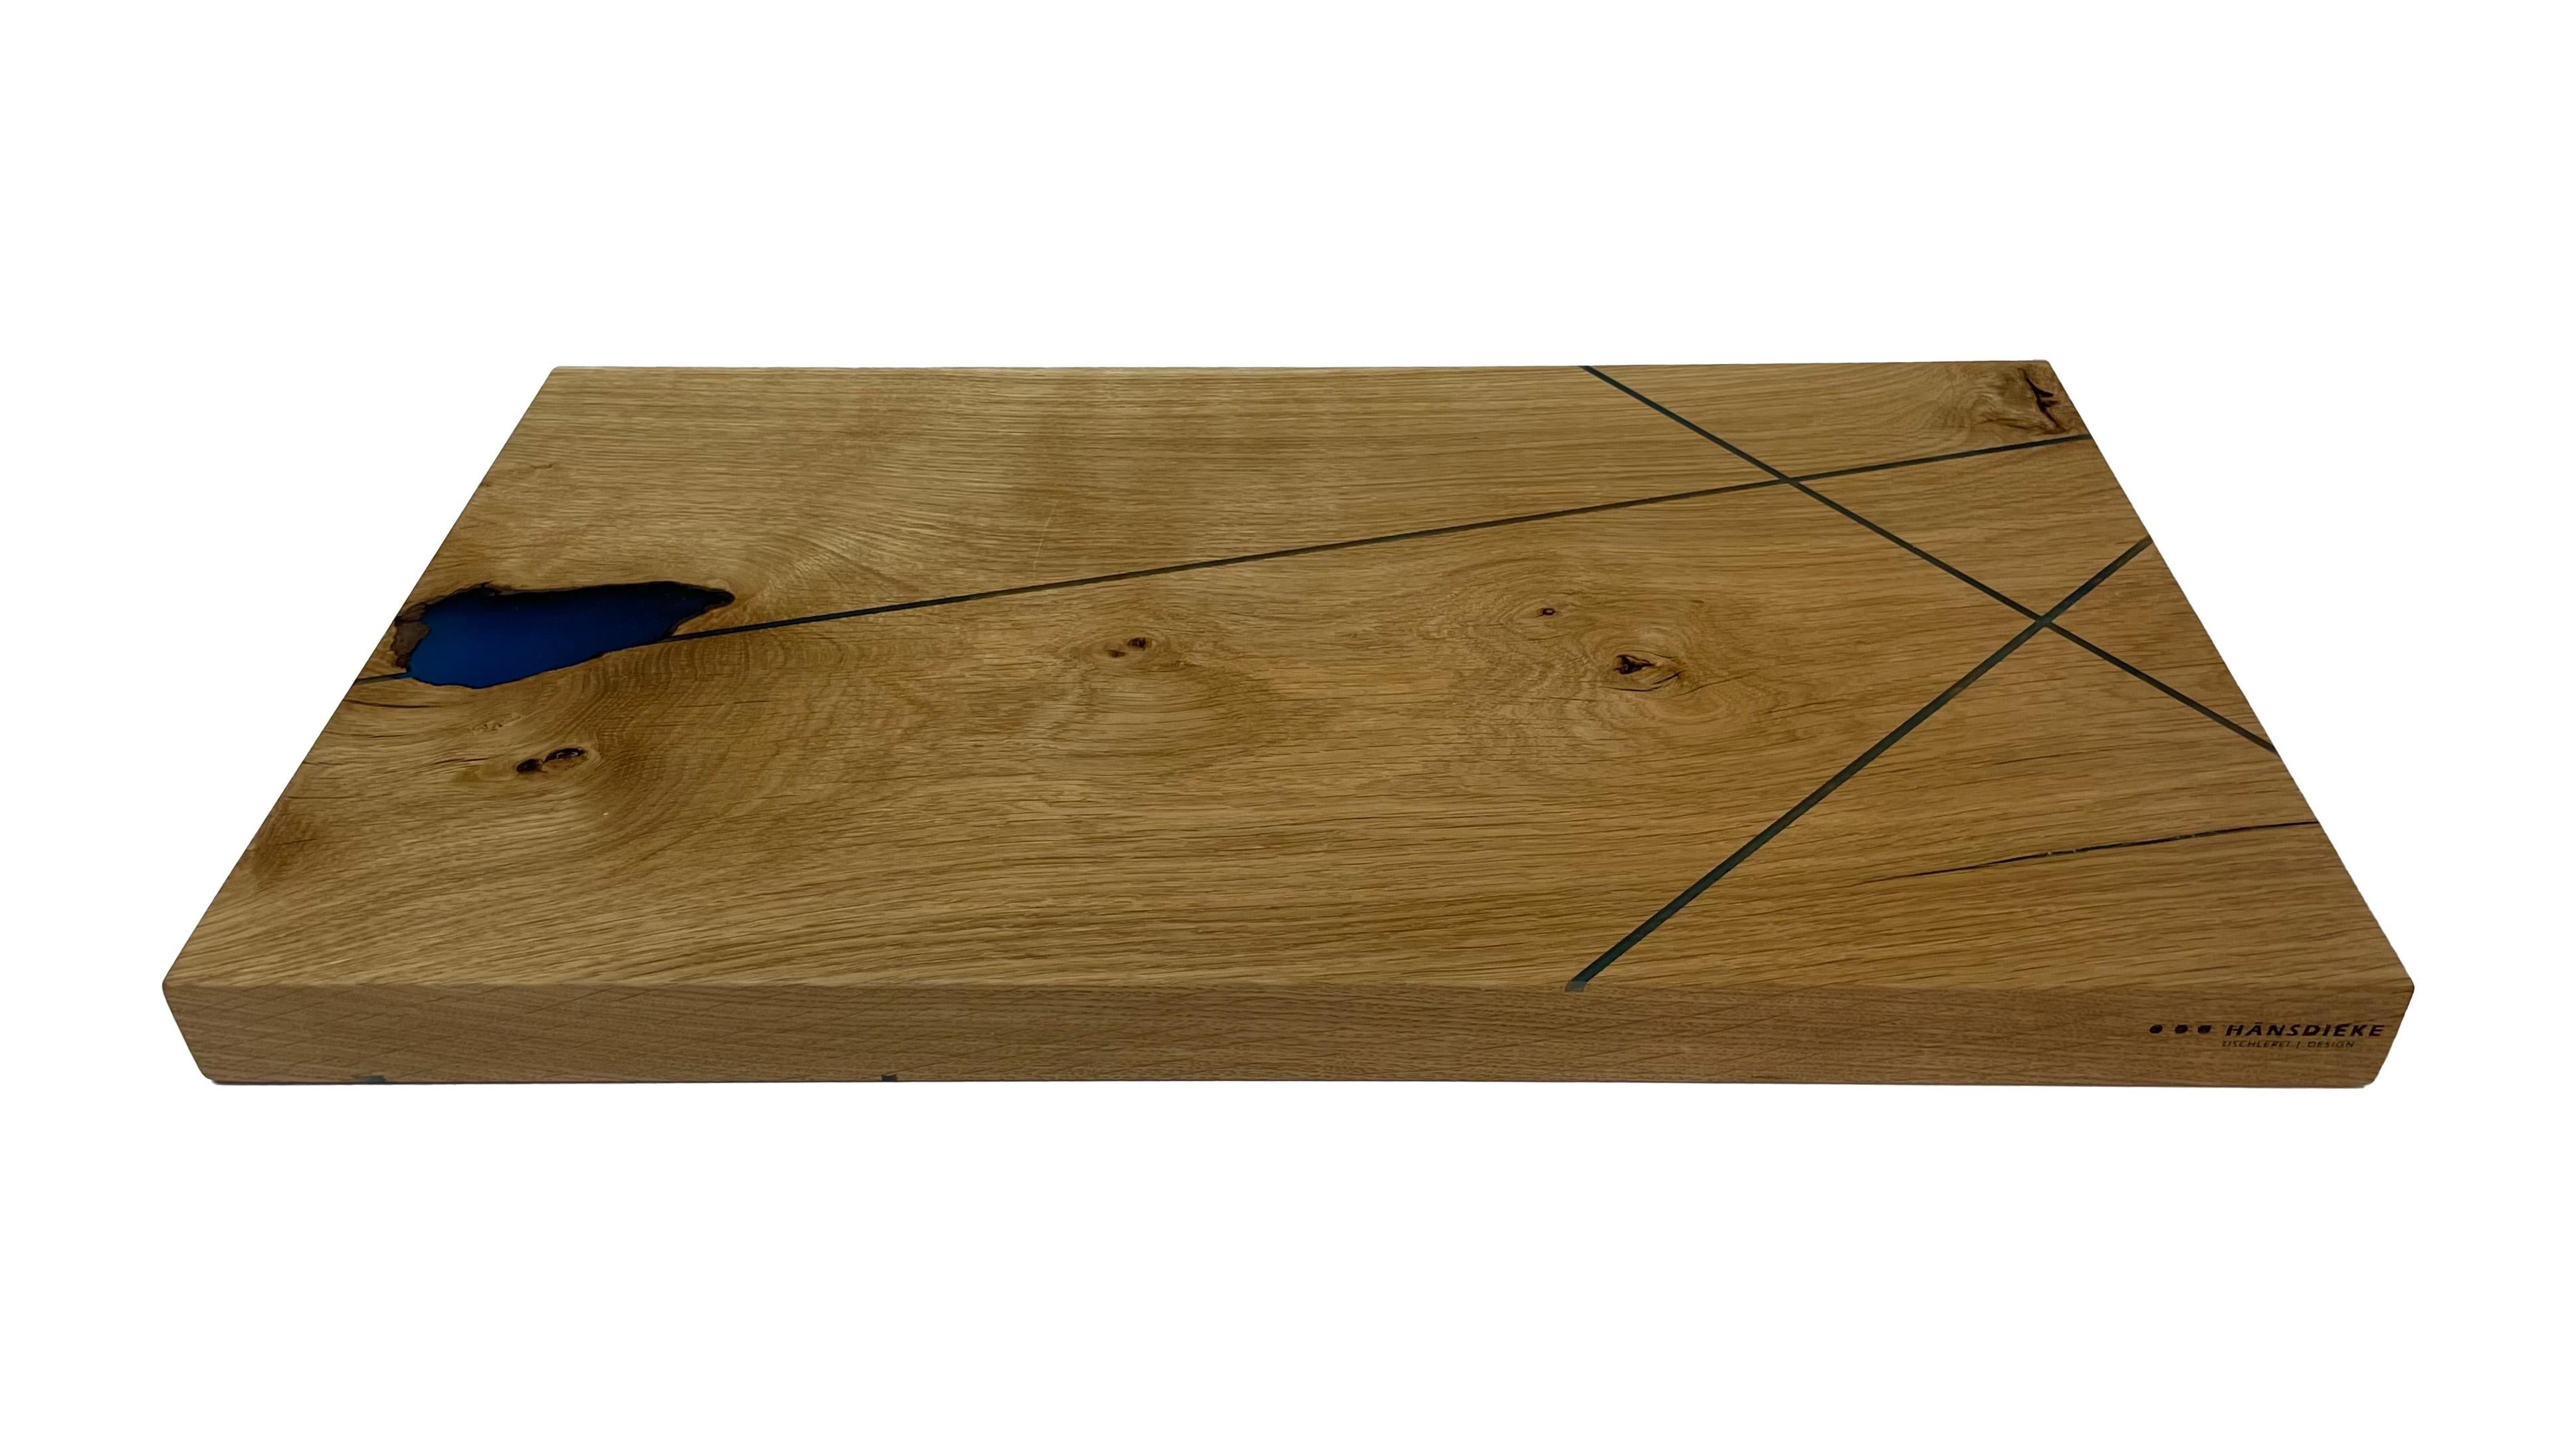 The oak cutting board was glued in multiple layers and cracks, knots, etc. were filled with high-quality epoxy. As a small design, fine lines were also grooved and filled with epoxy resin. The surfaces are very finely ground and sealed with oil. The